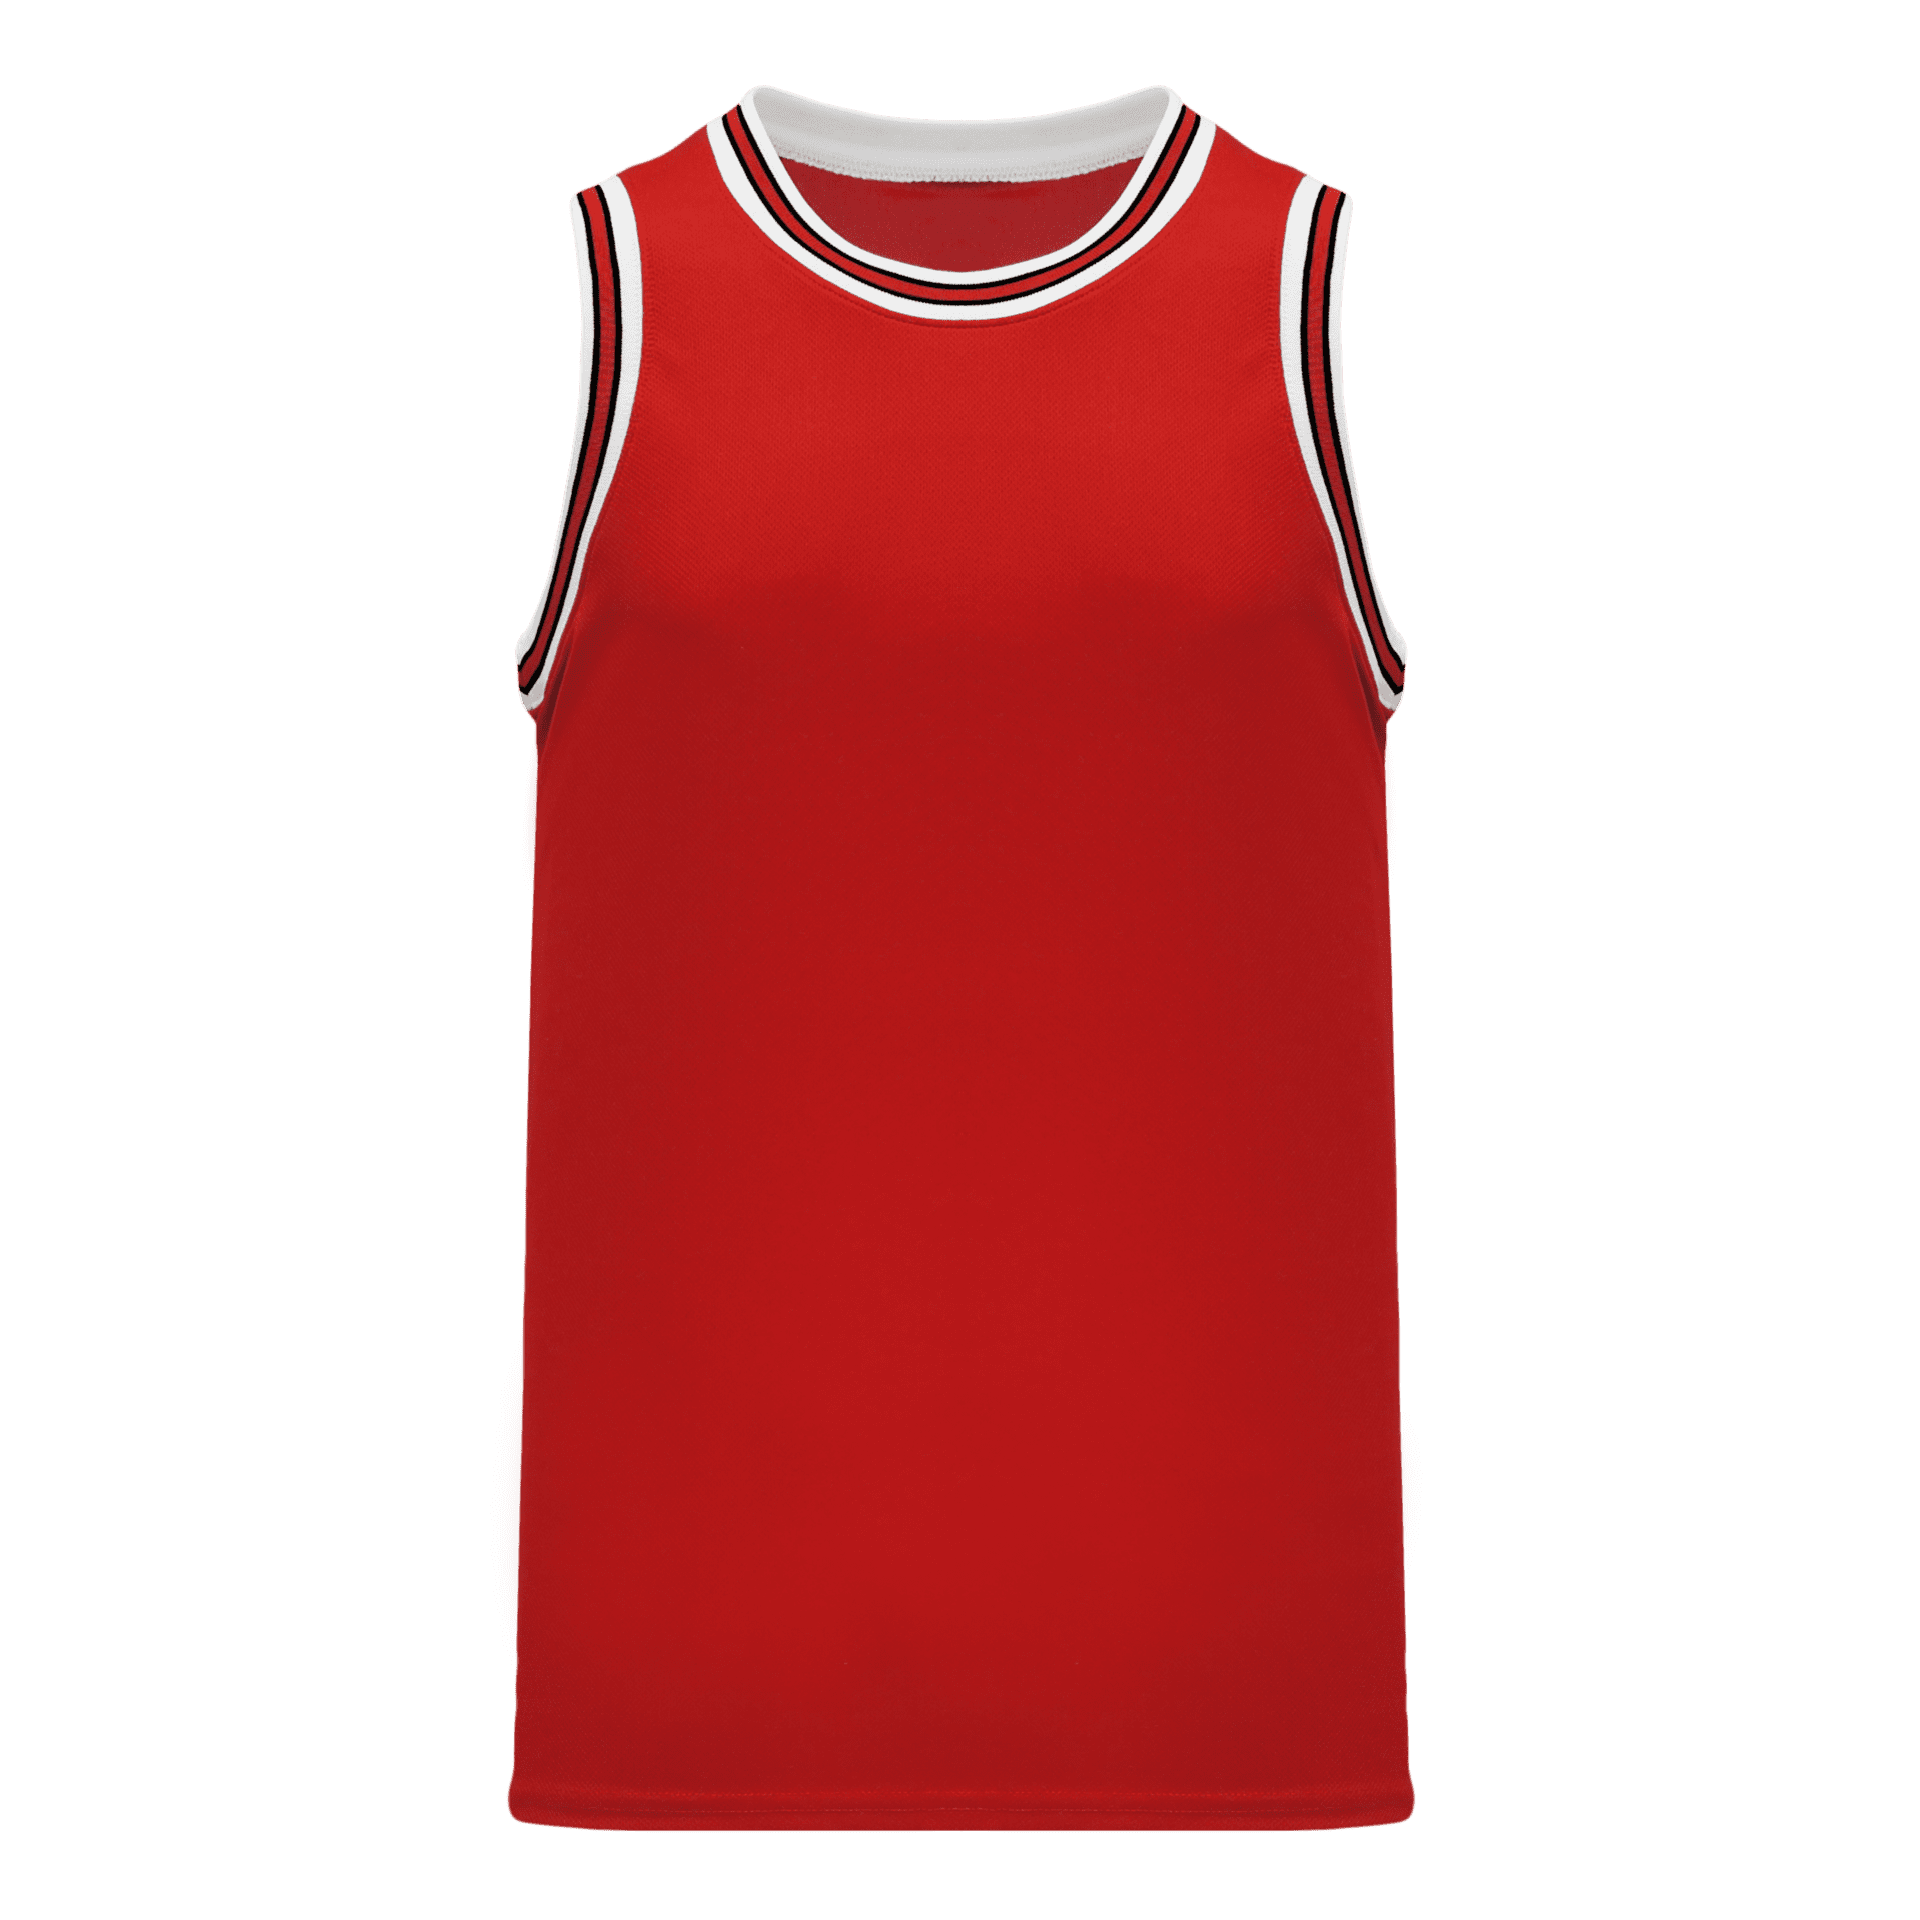 ATHLETIC KNIT PRO BASKETBALL JERSEY #B1710 Red / White / Black